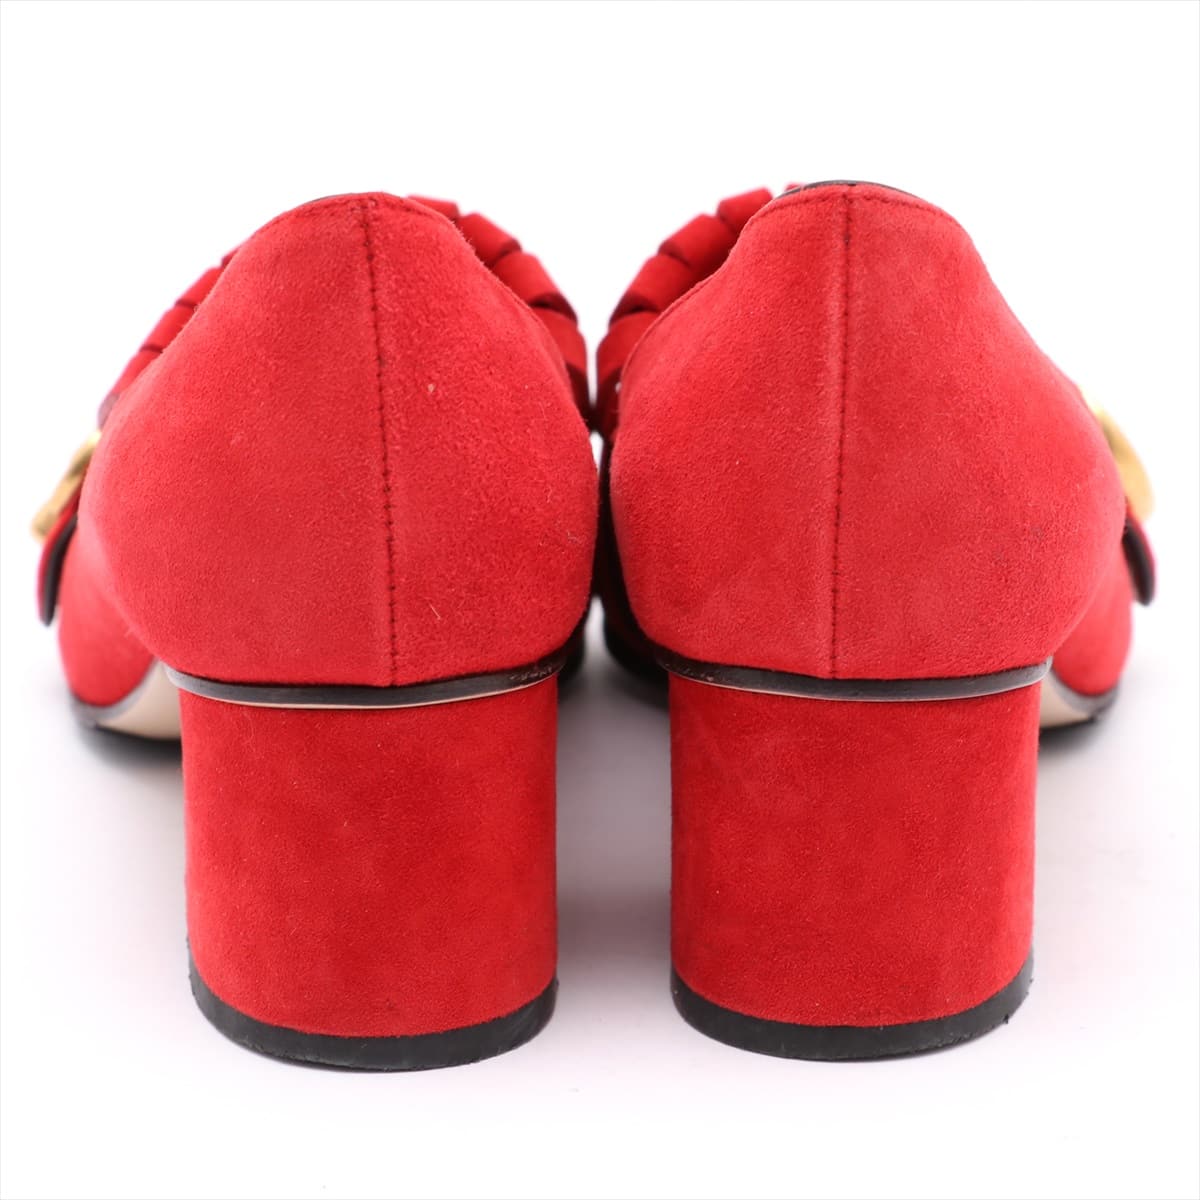 Gucci GG Marmont Suede Pumps 35 Ladies' Red